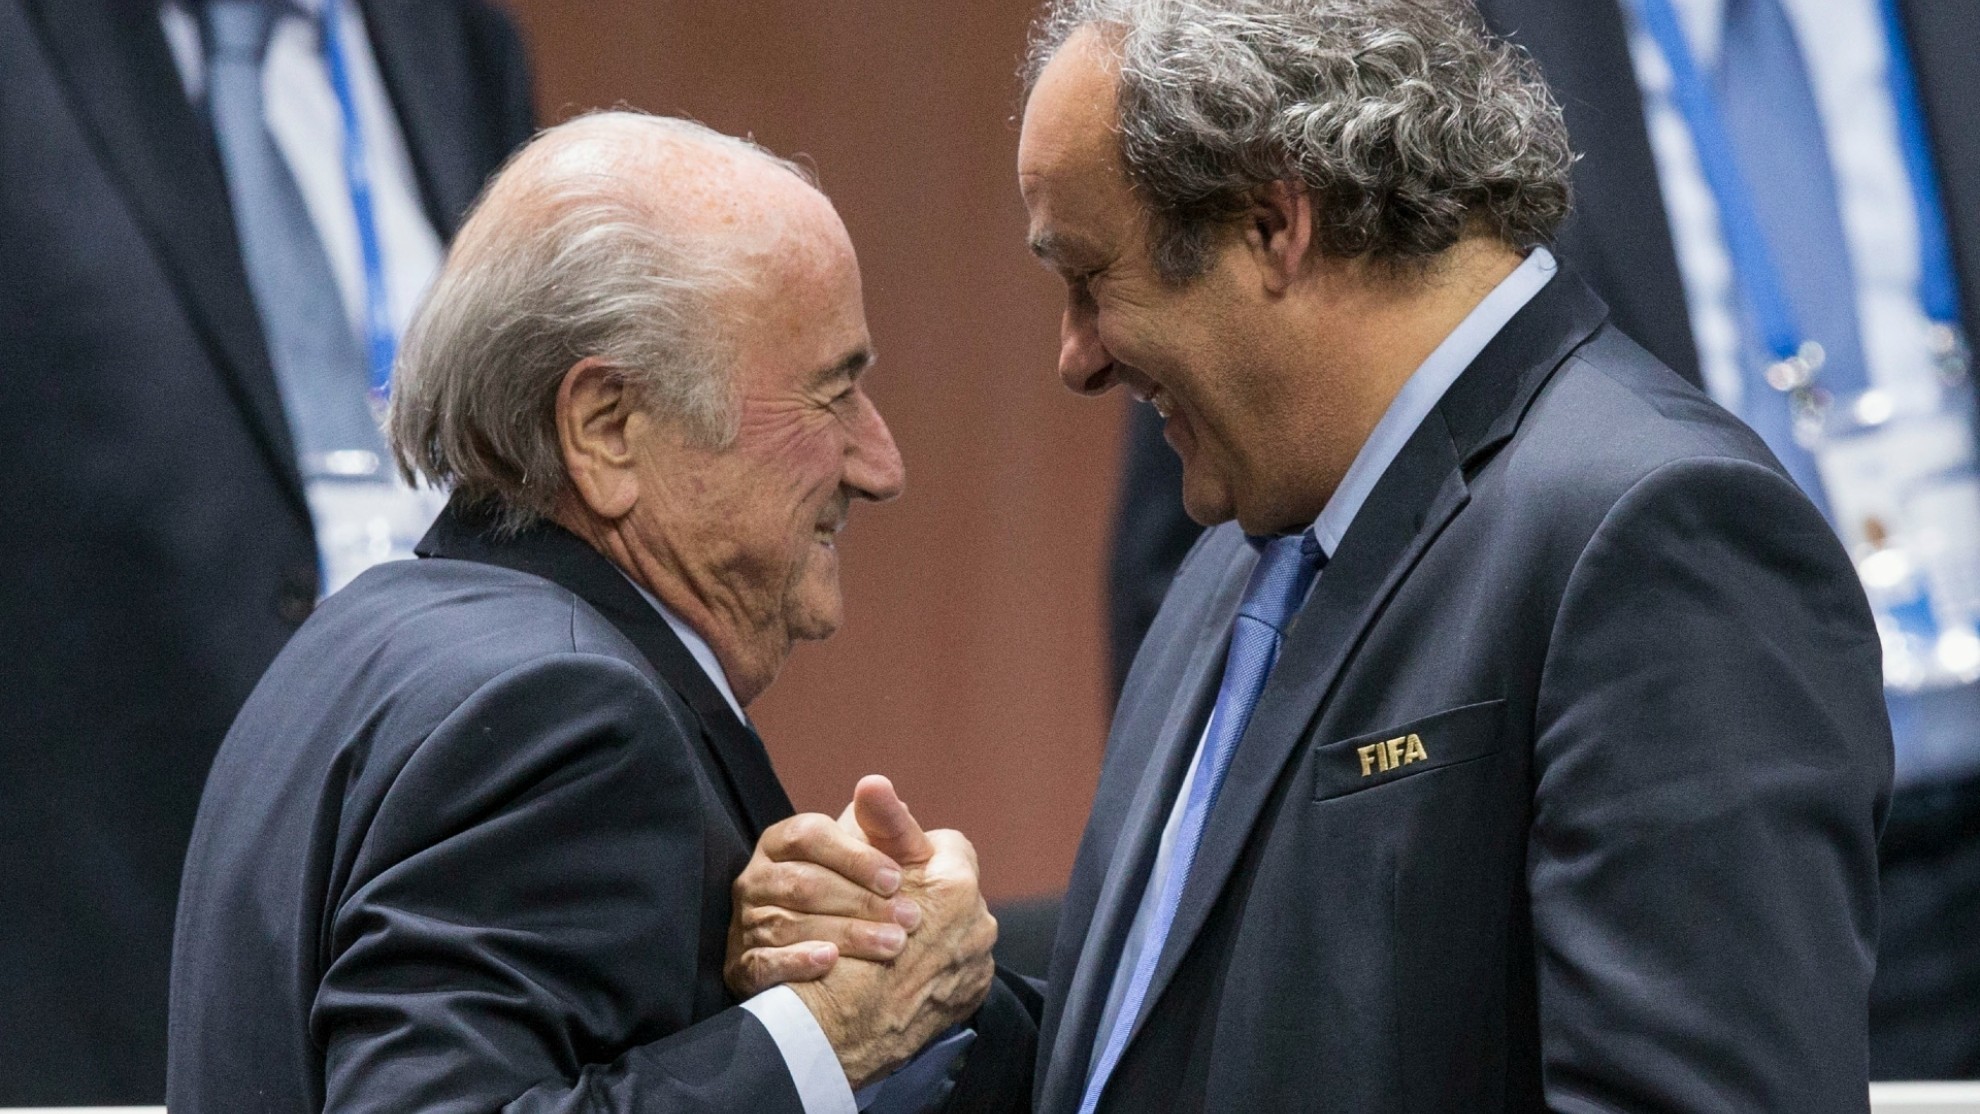 Blatter, Platini Cleared By Swiss Court In FIFA Fraud Trial